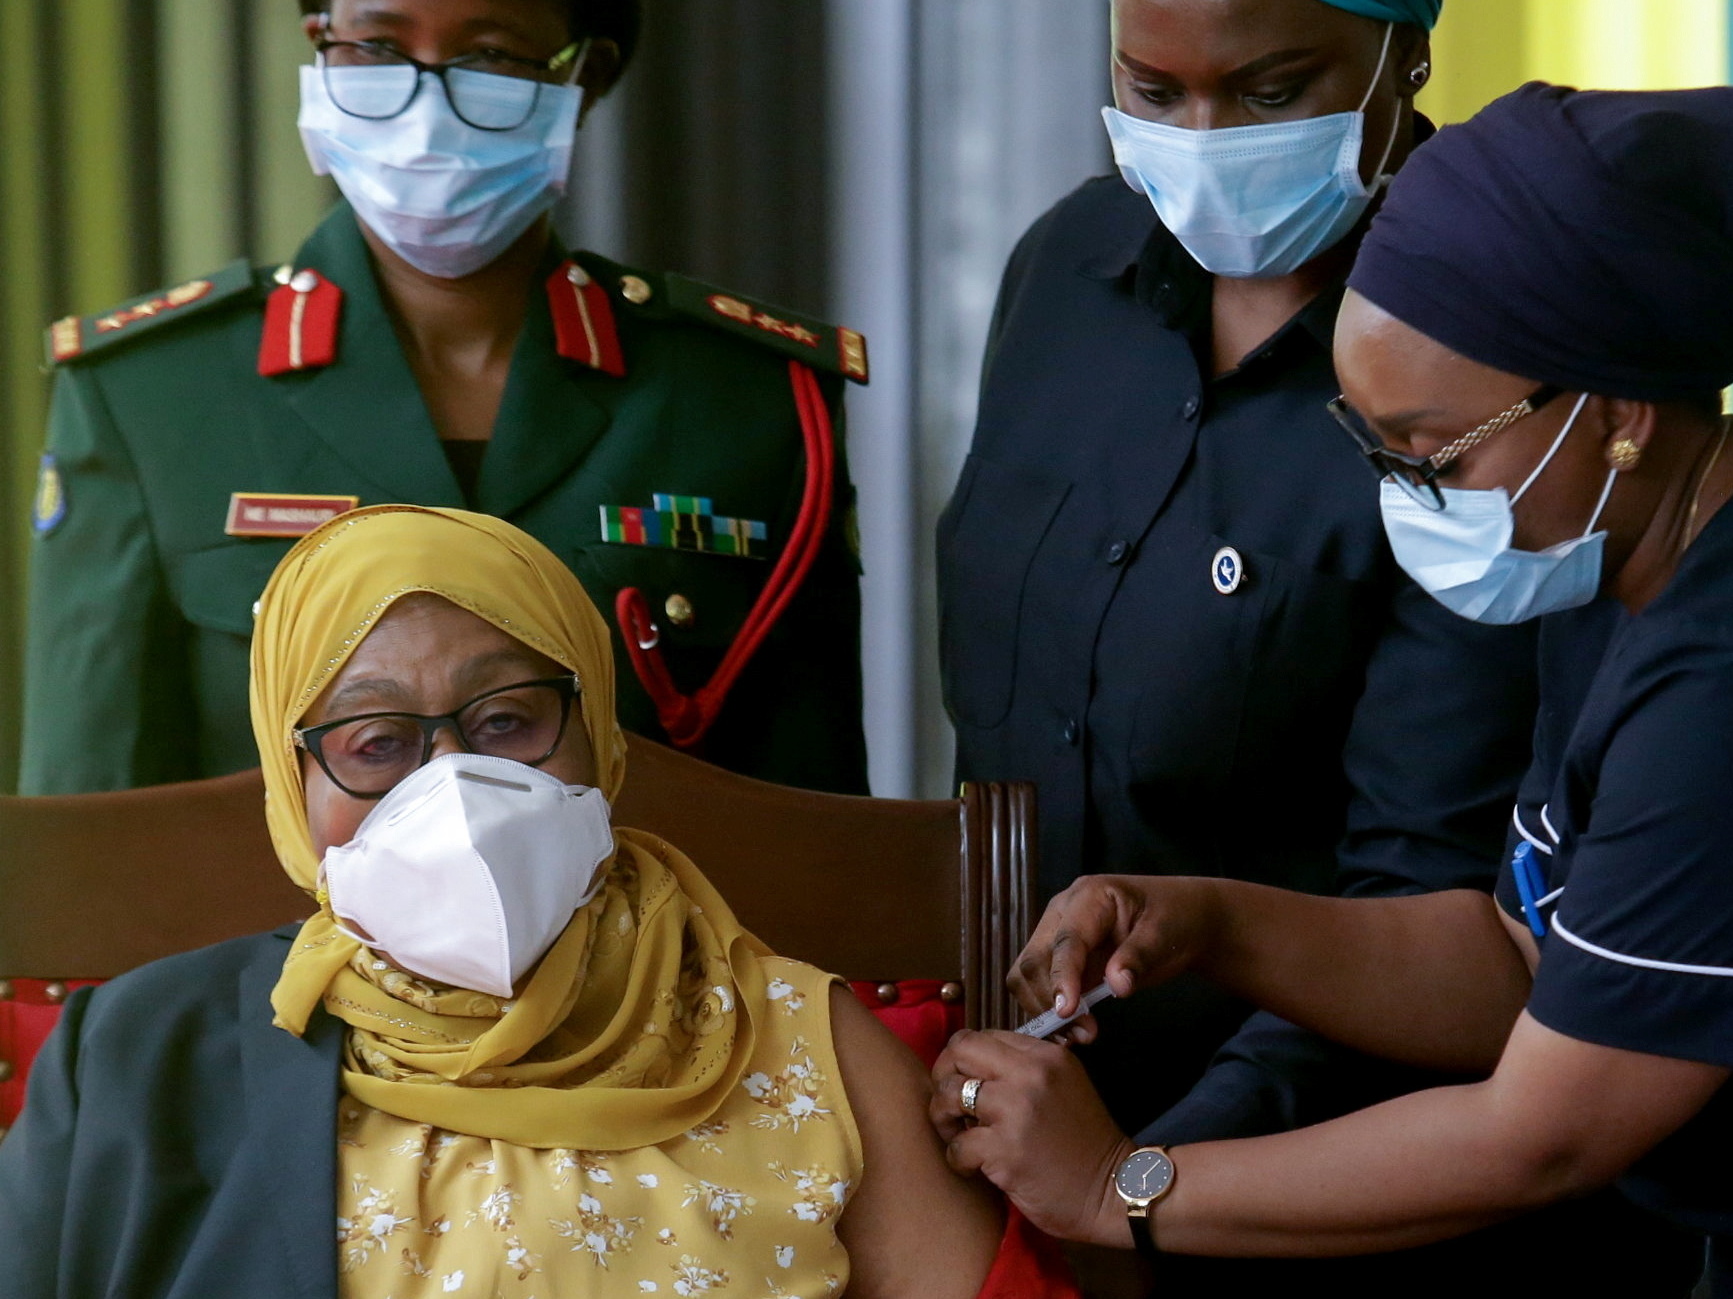 Tanzania first female president kicks off COVID vaccinations after year long denial